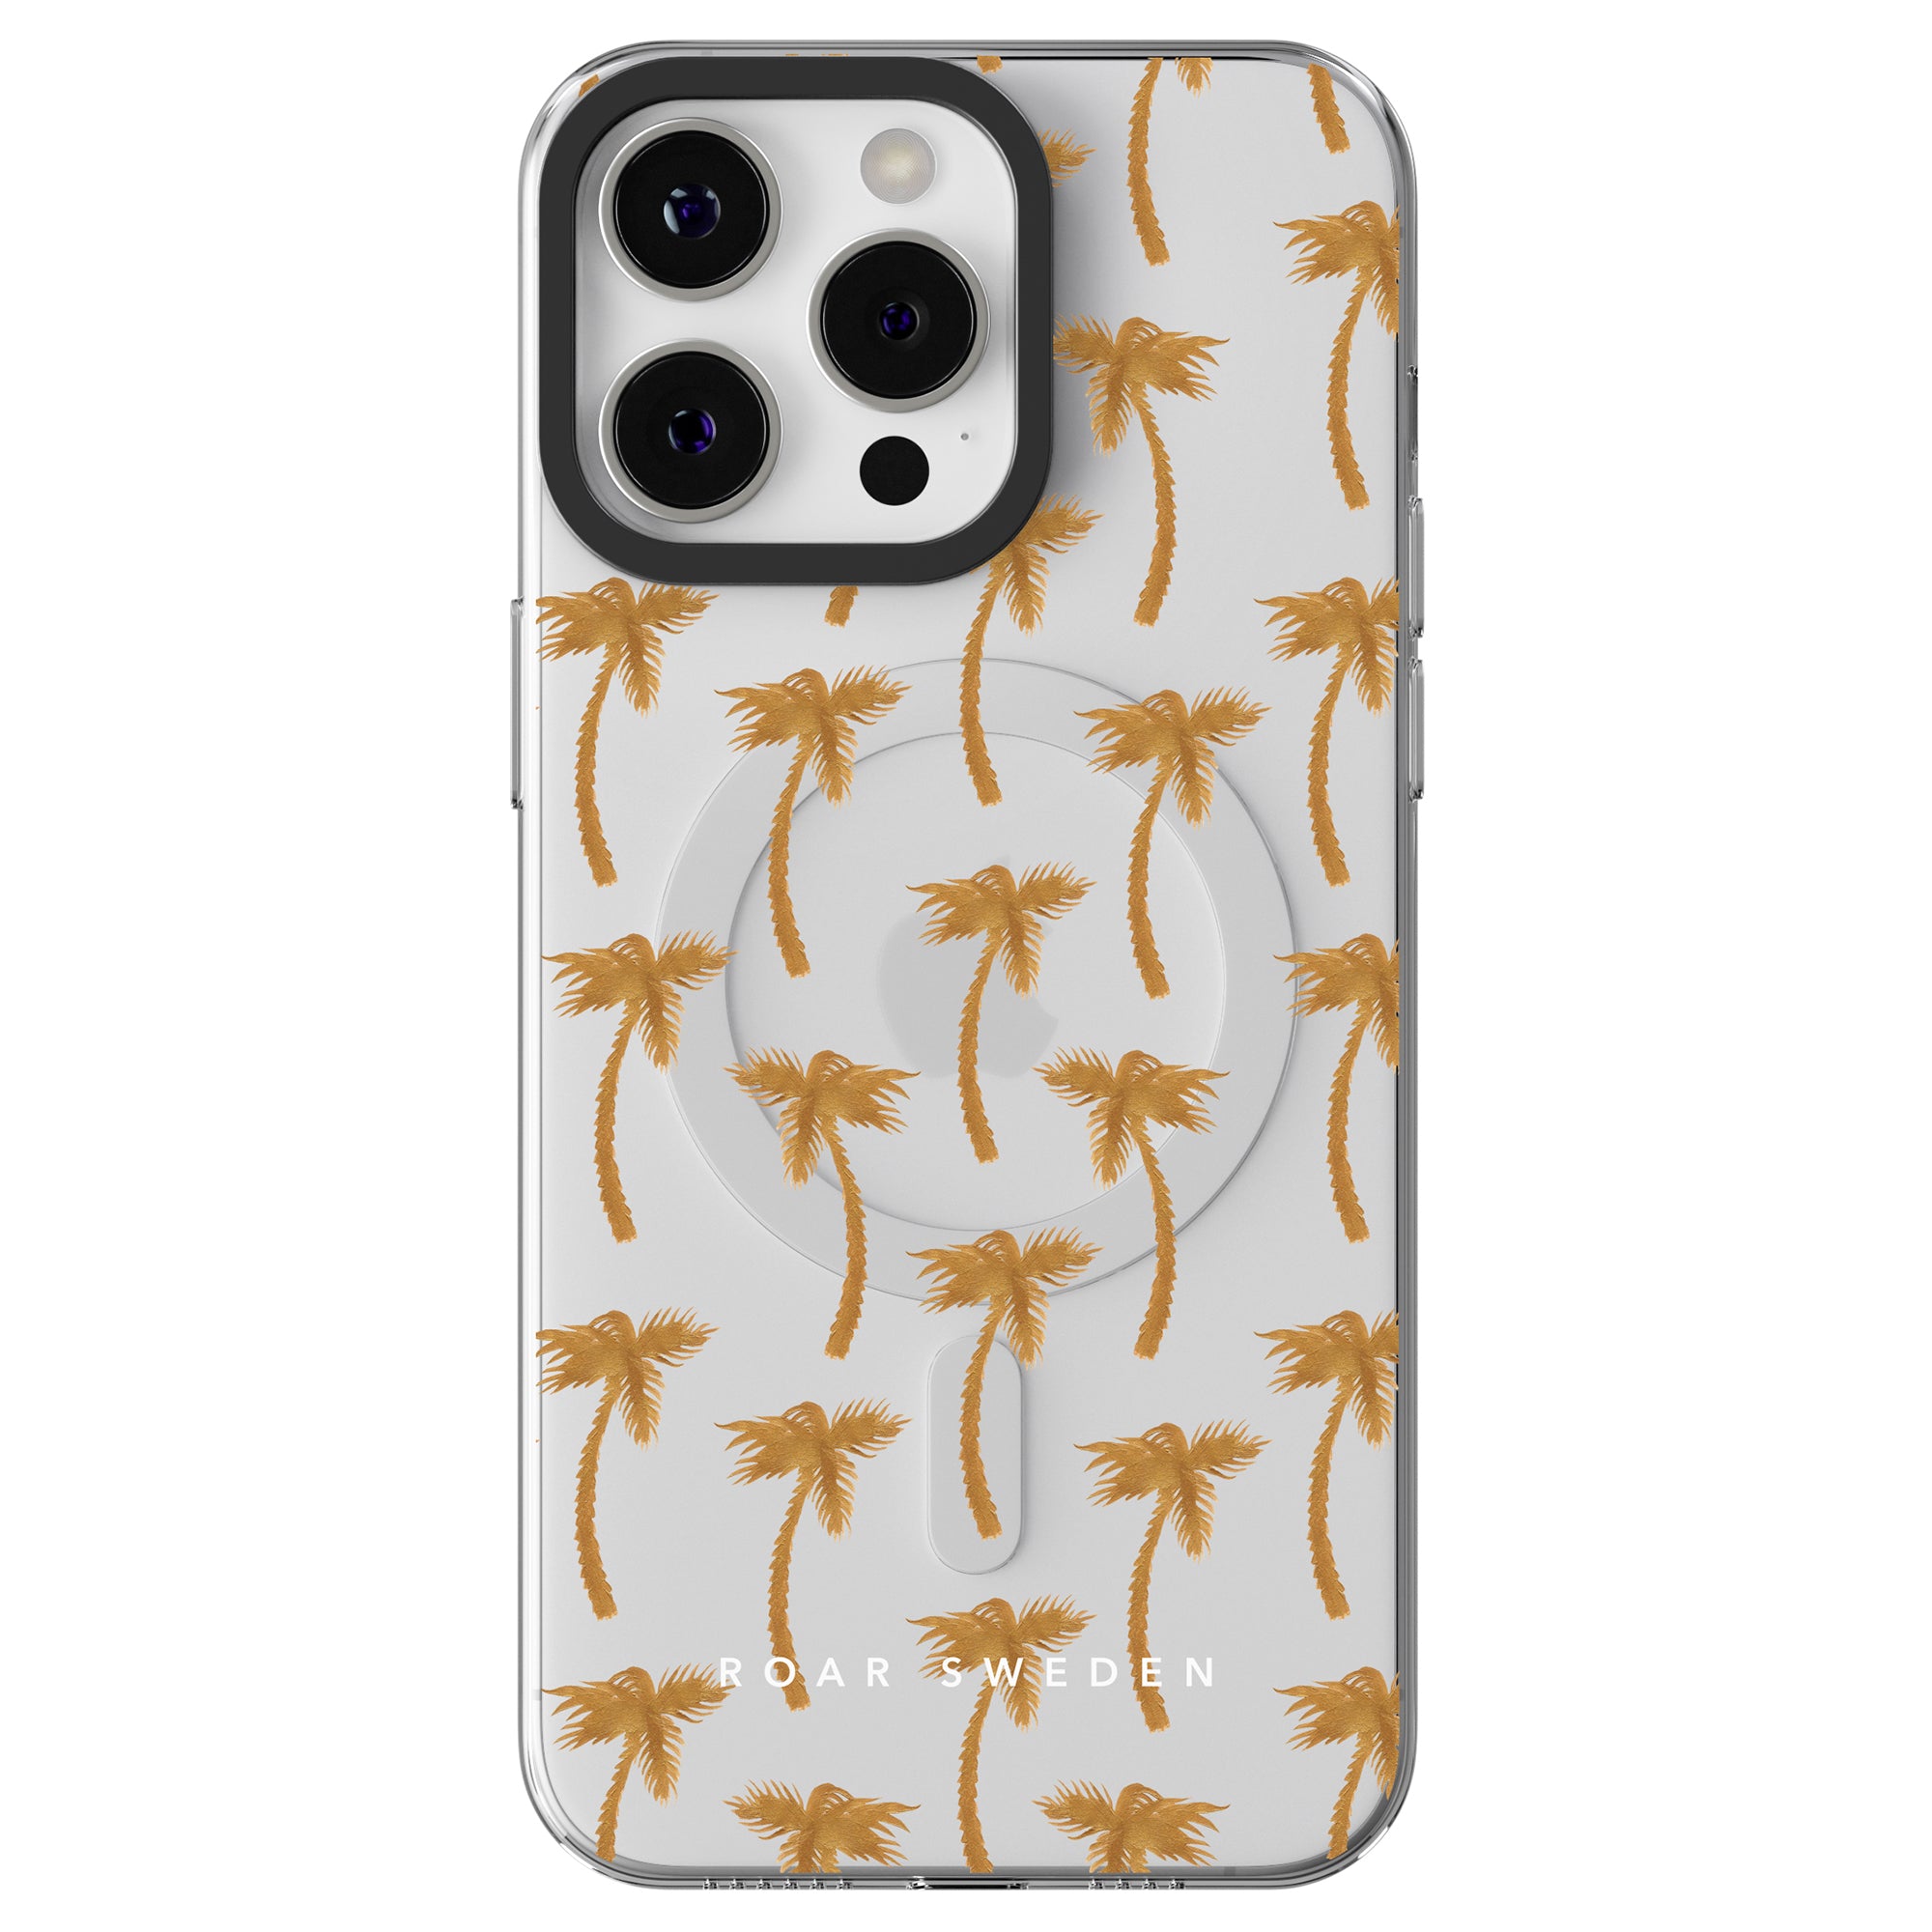 This iPhone features a Golden Palms - MagSafe with a chic pattern of gold palm trees on a white background. "ROAR SWEDEN" is elegantly printed at the bottom, making it part of the Jungle Collection.